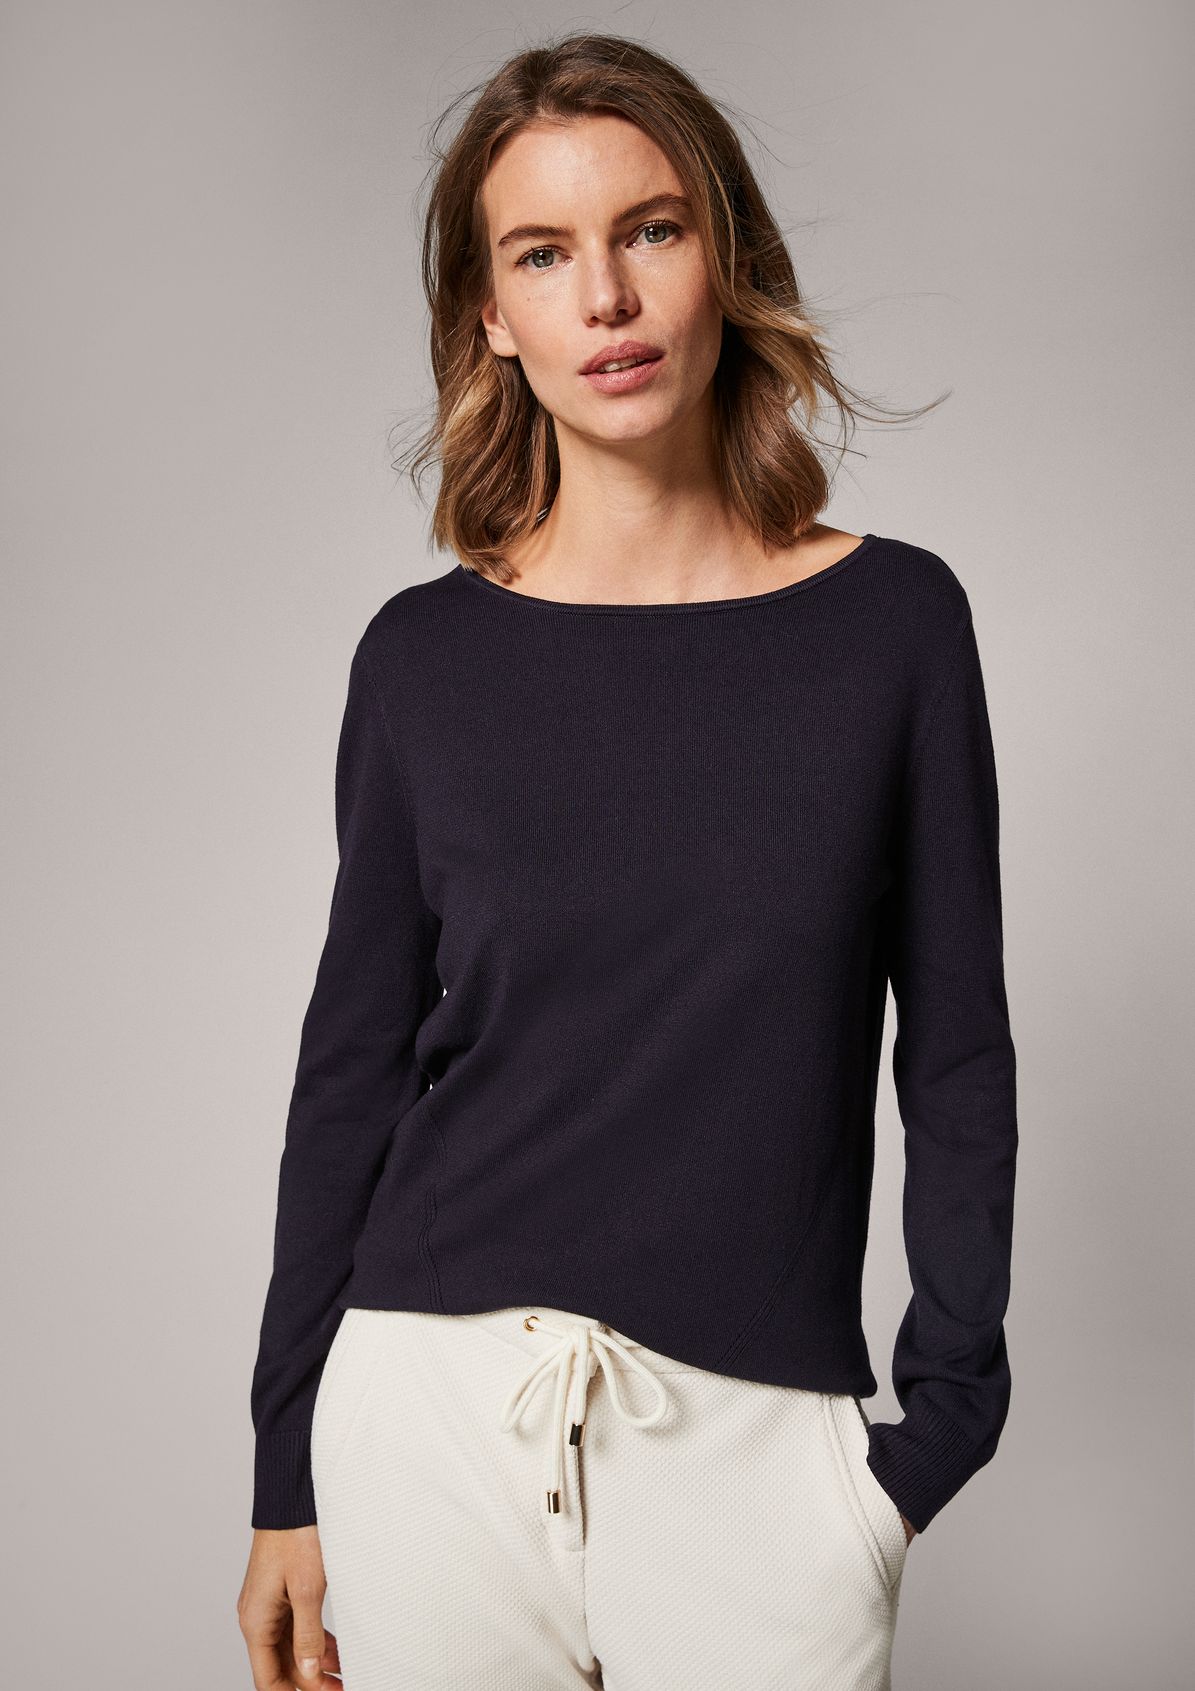 Jumper with openwork details from comma